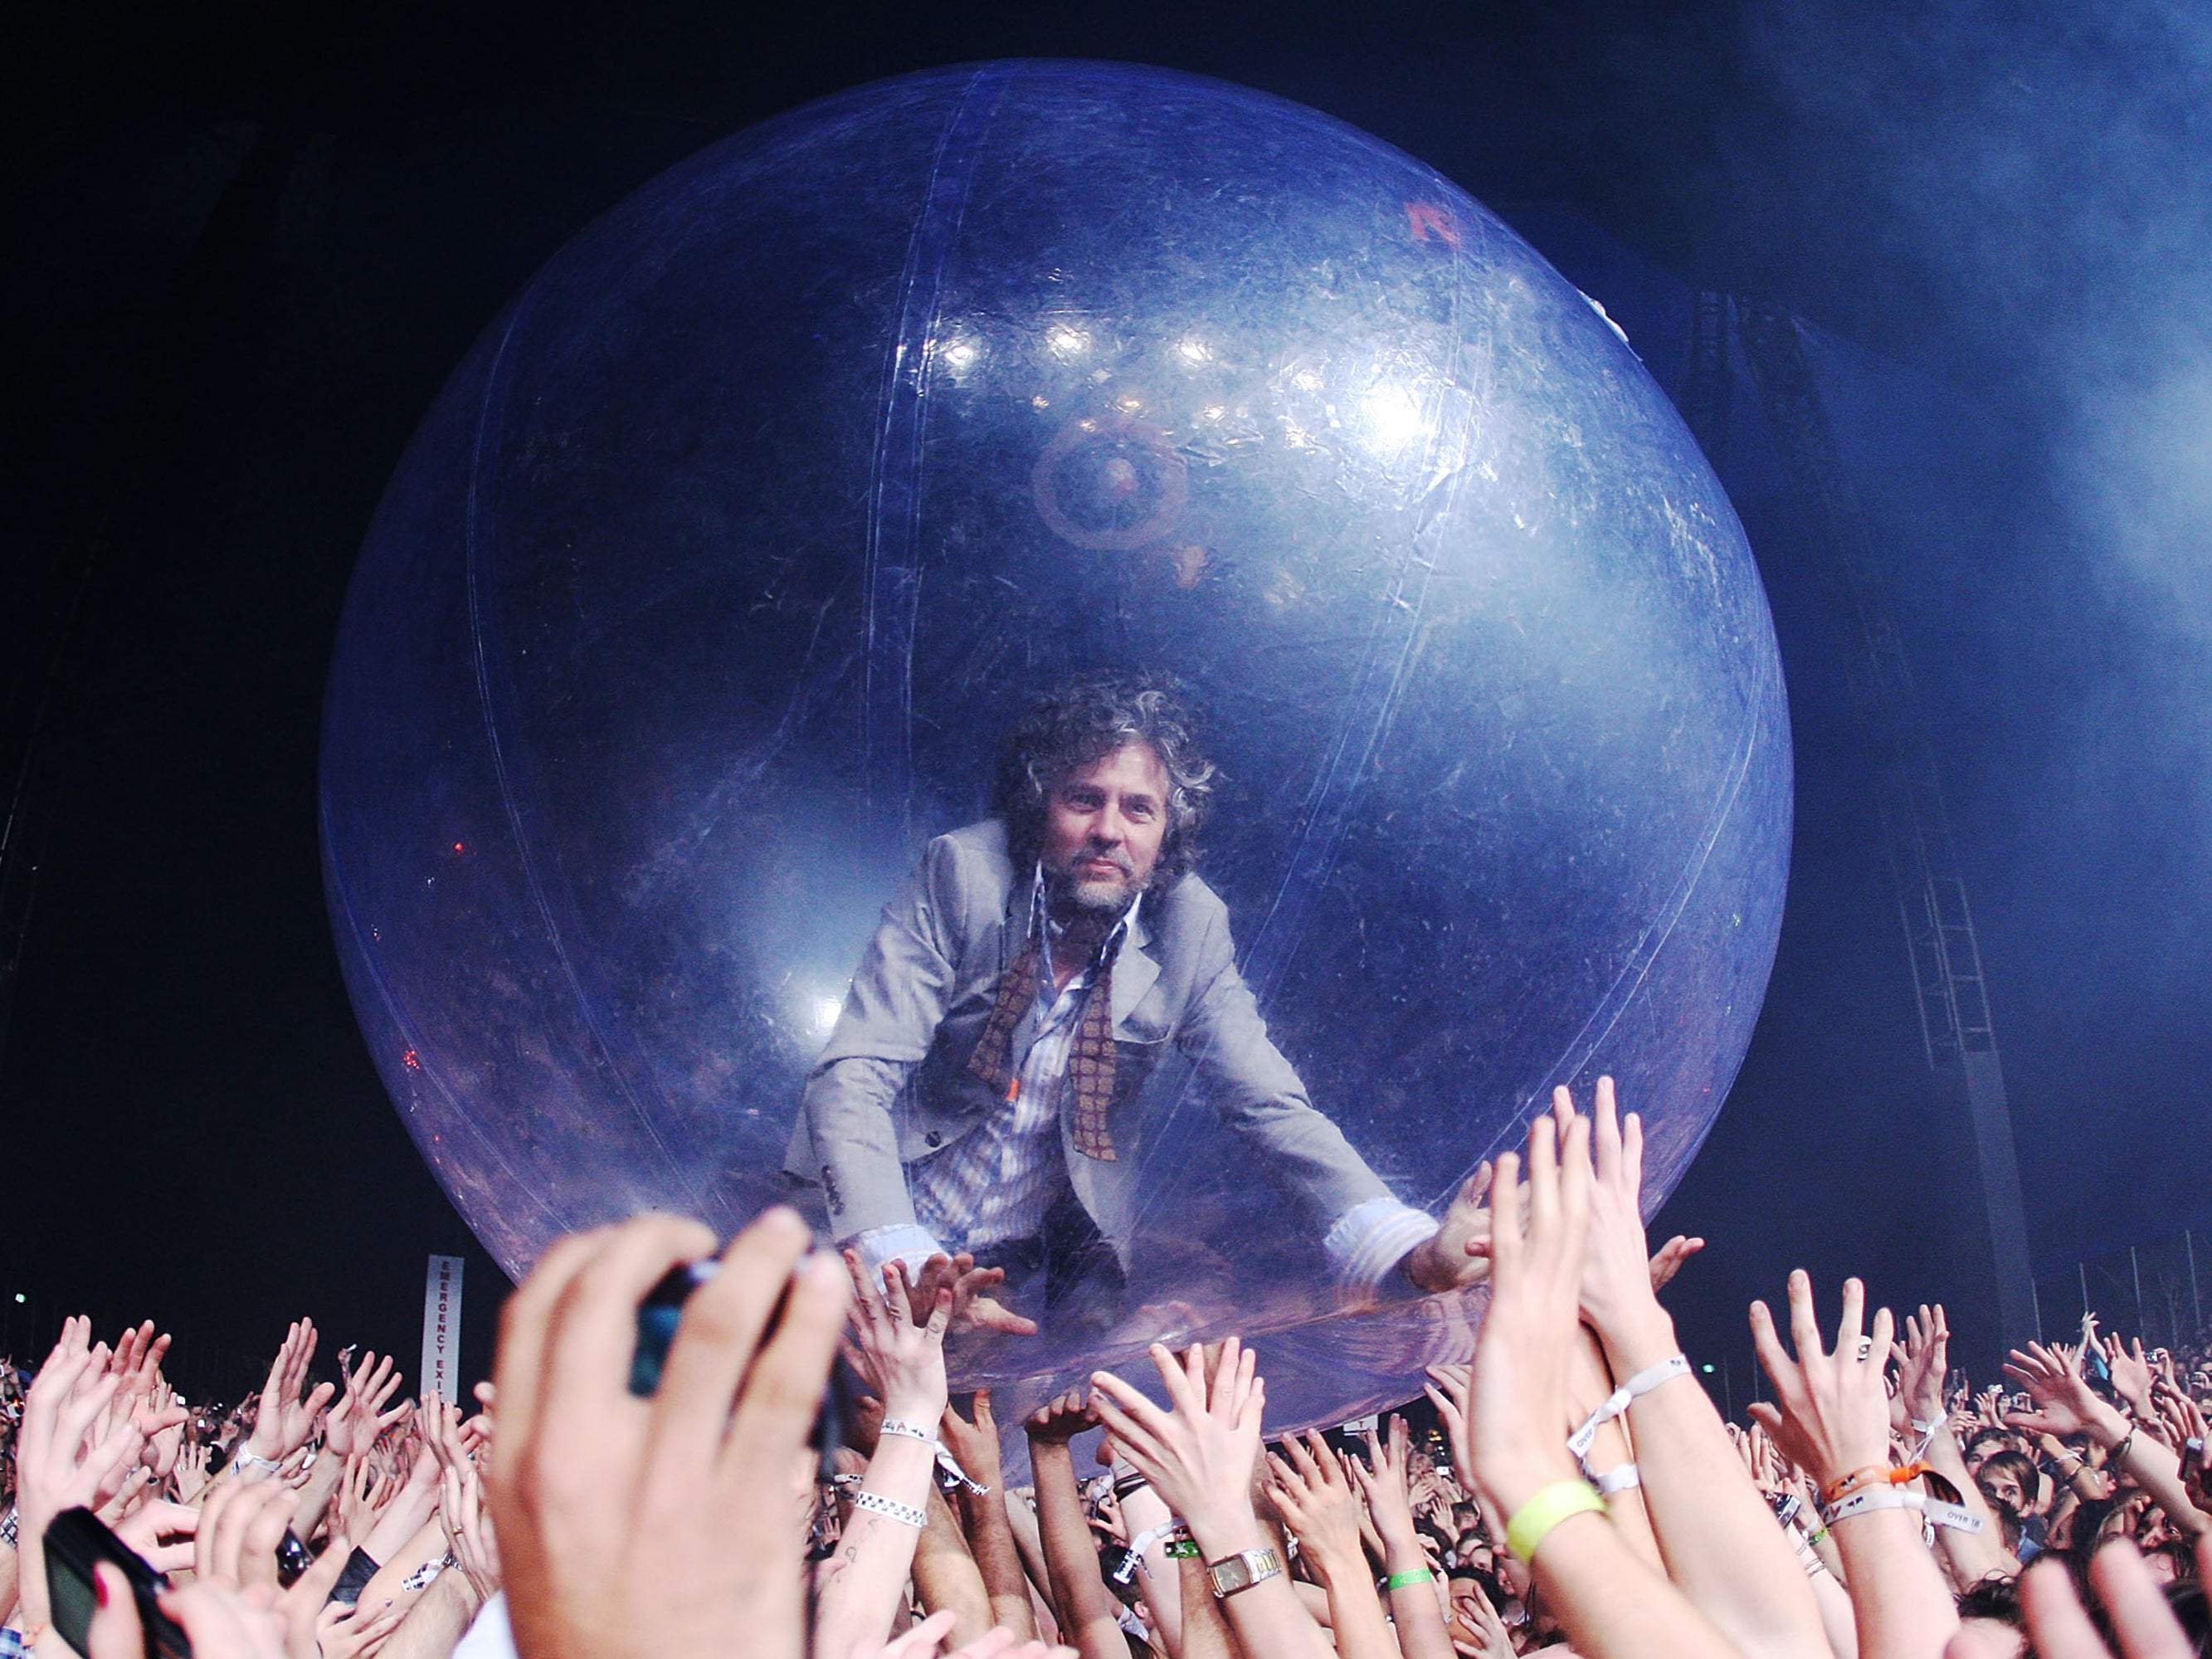 The new normal? Wayne Coyne of The Flaming Lips at a music festival in Australia